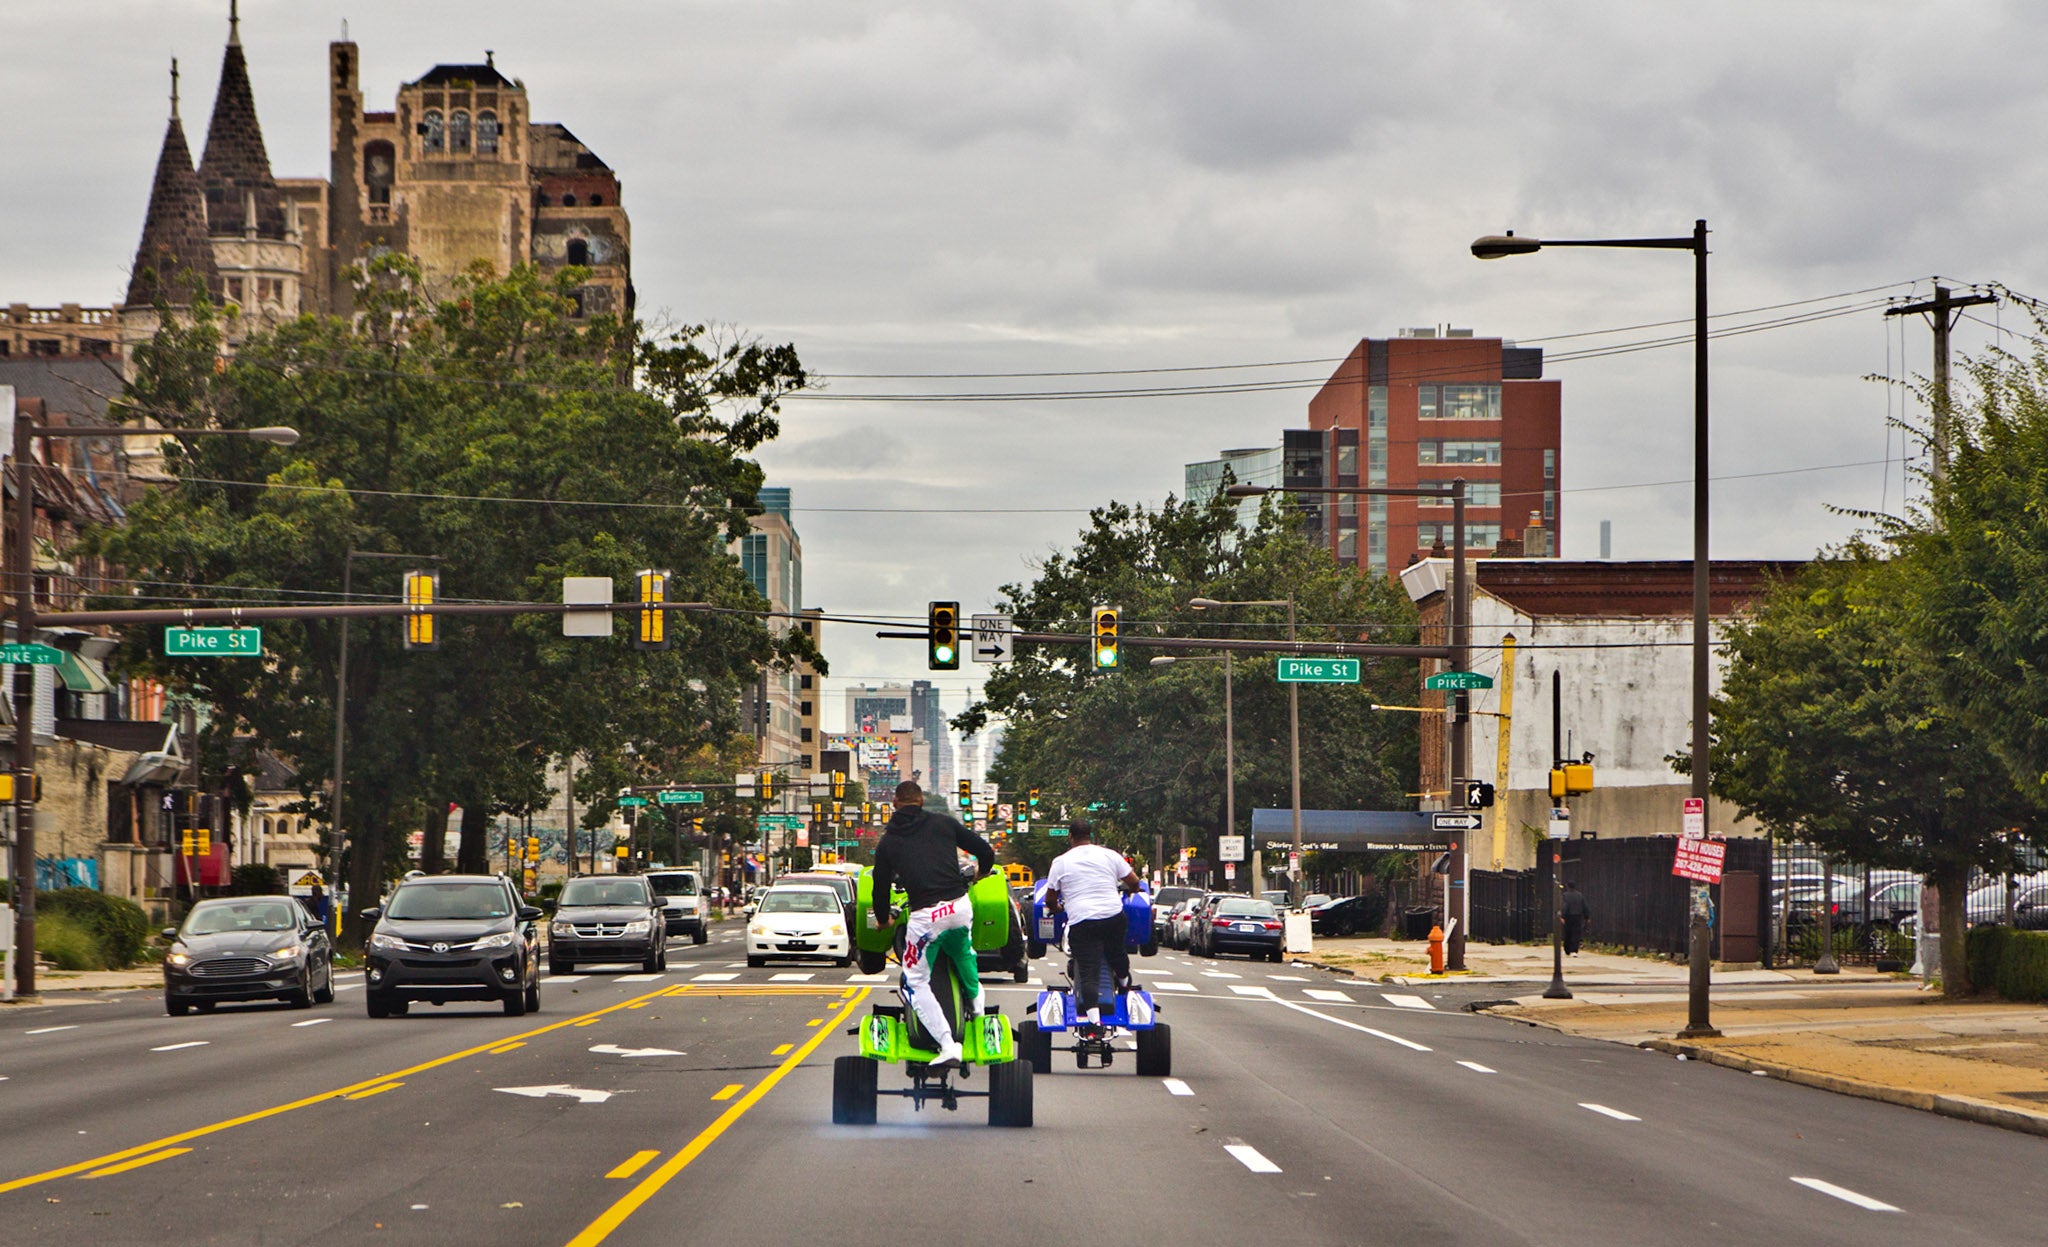 Why #BIKELIFE is Taking Over The Streets